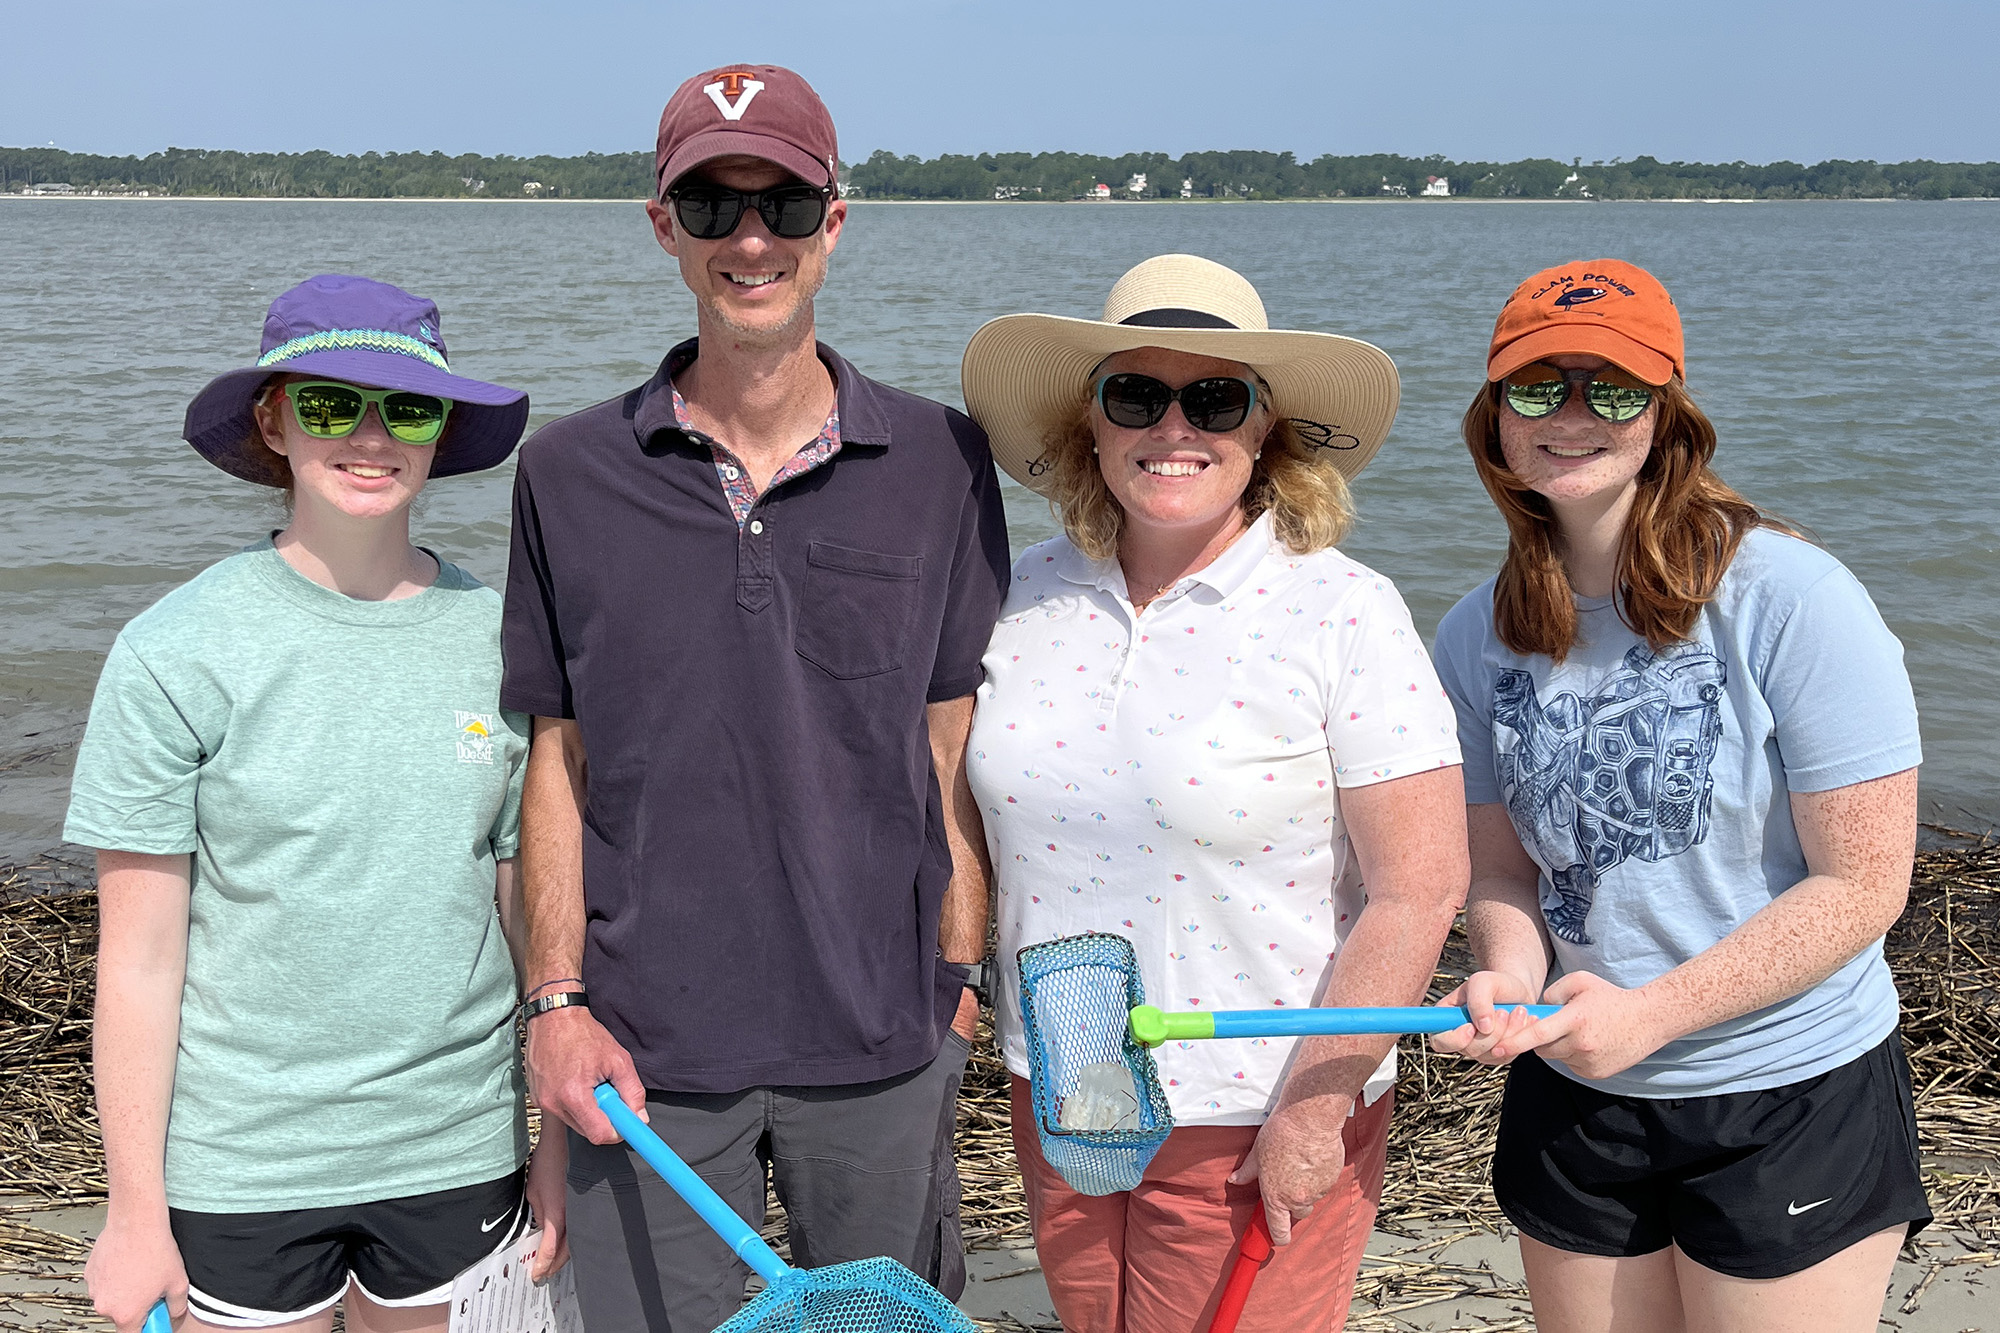 Family standing on a beach with hats, sunglasses, and crabbing gear.